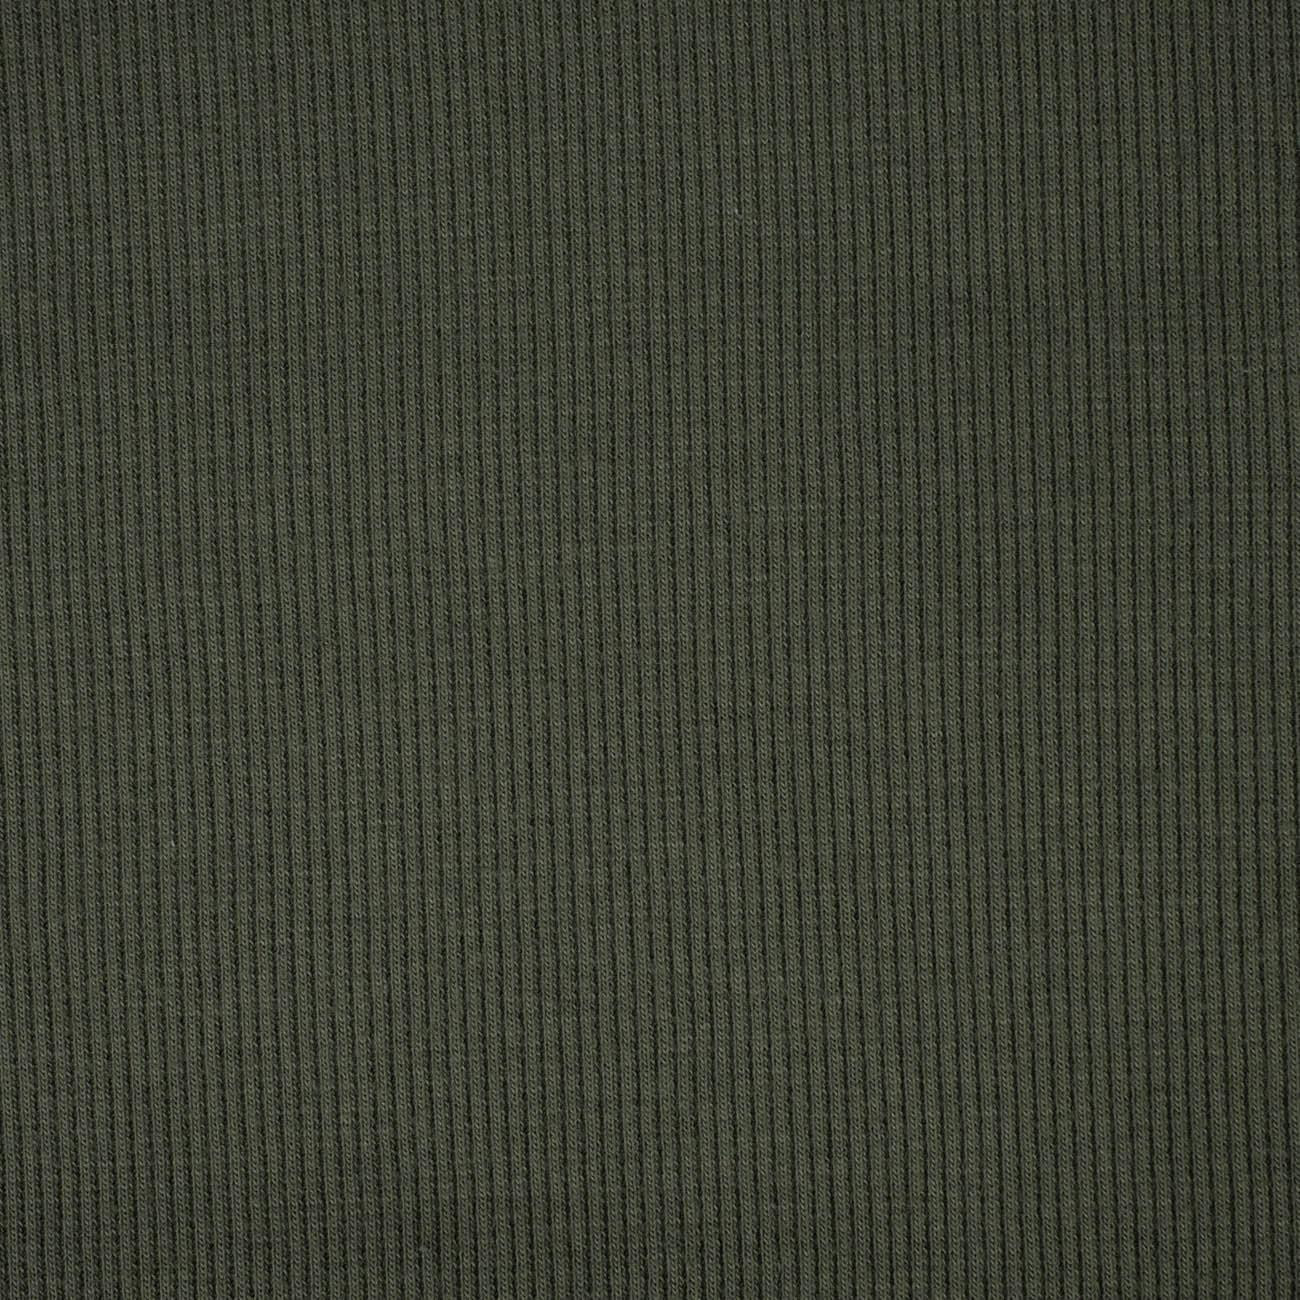 D-50 DARK OLIVE - Ribbed knit fabric